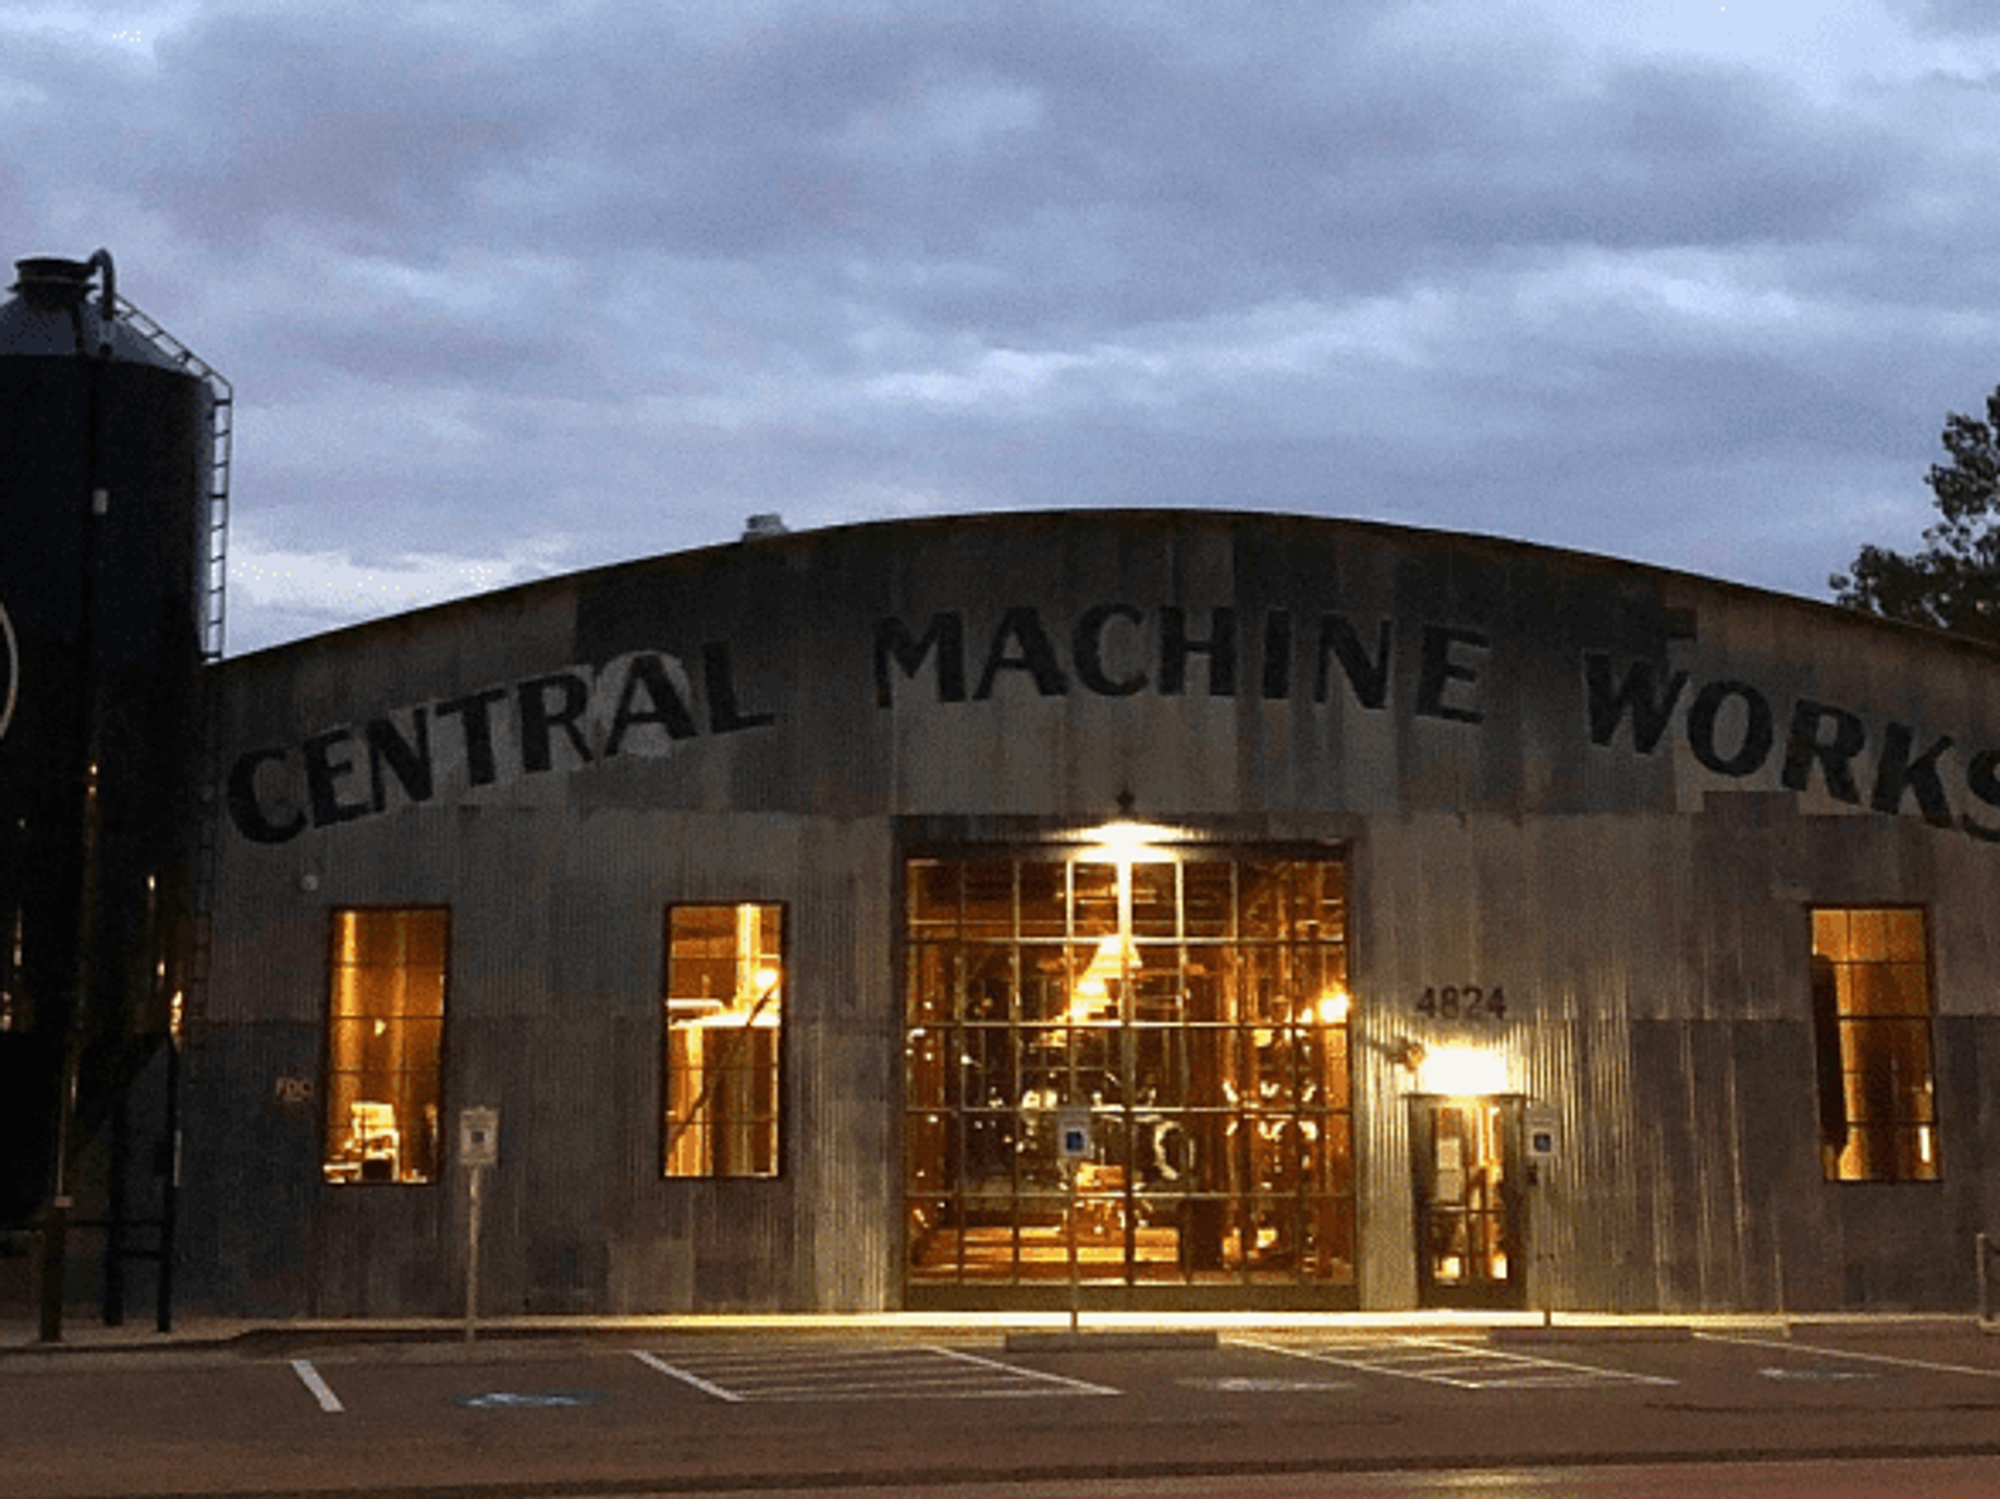 Central Machine Works is now open in Govalle.